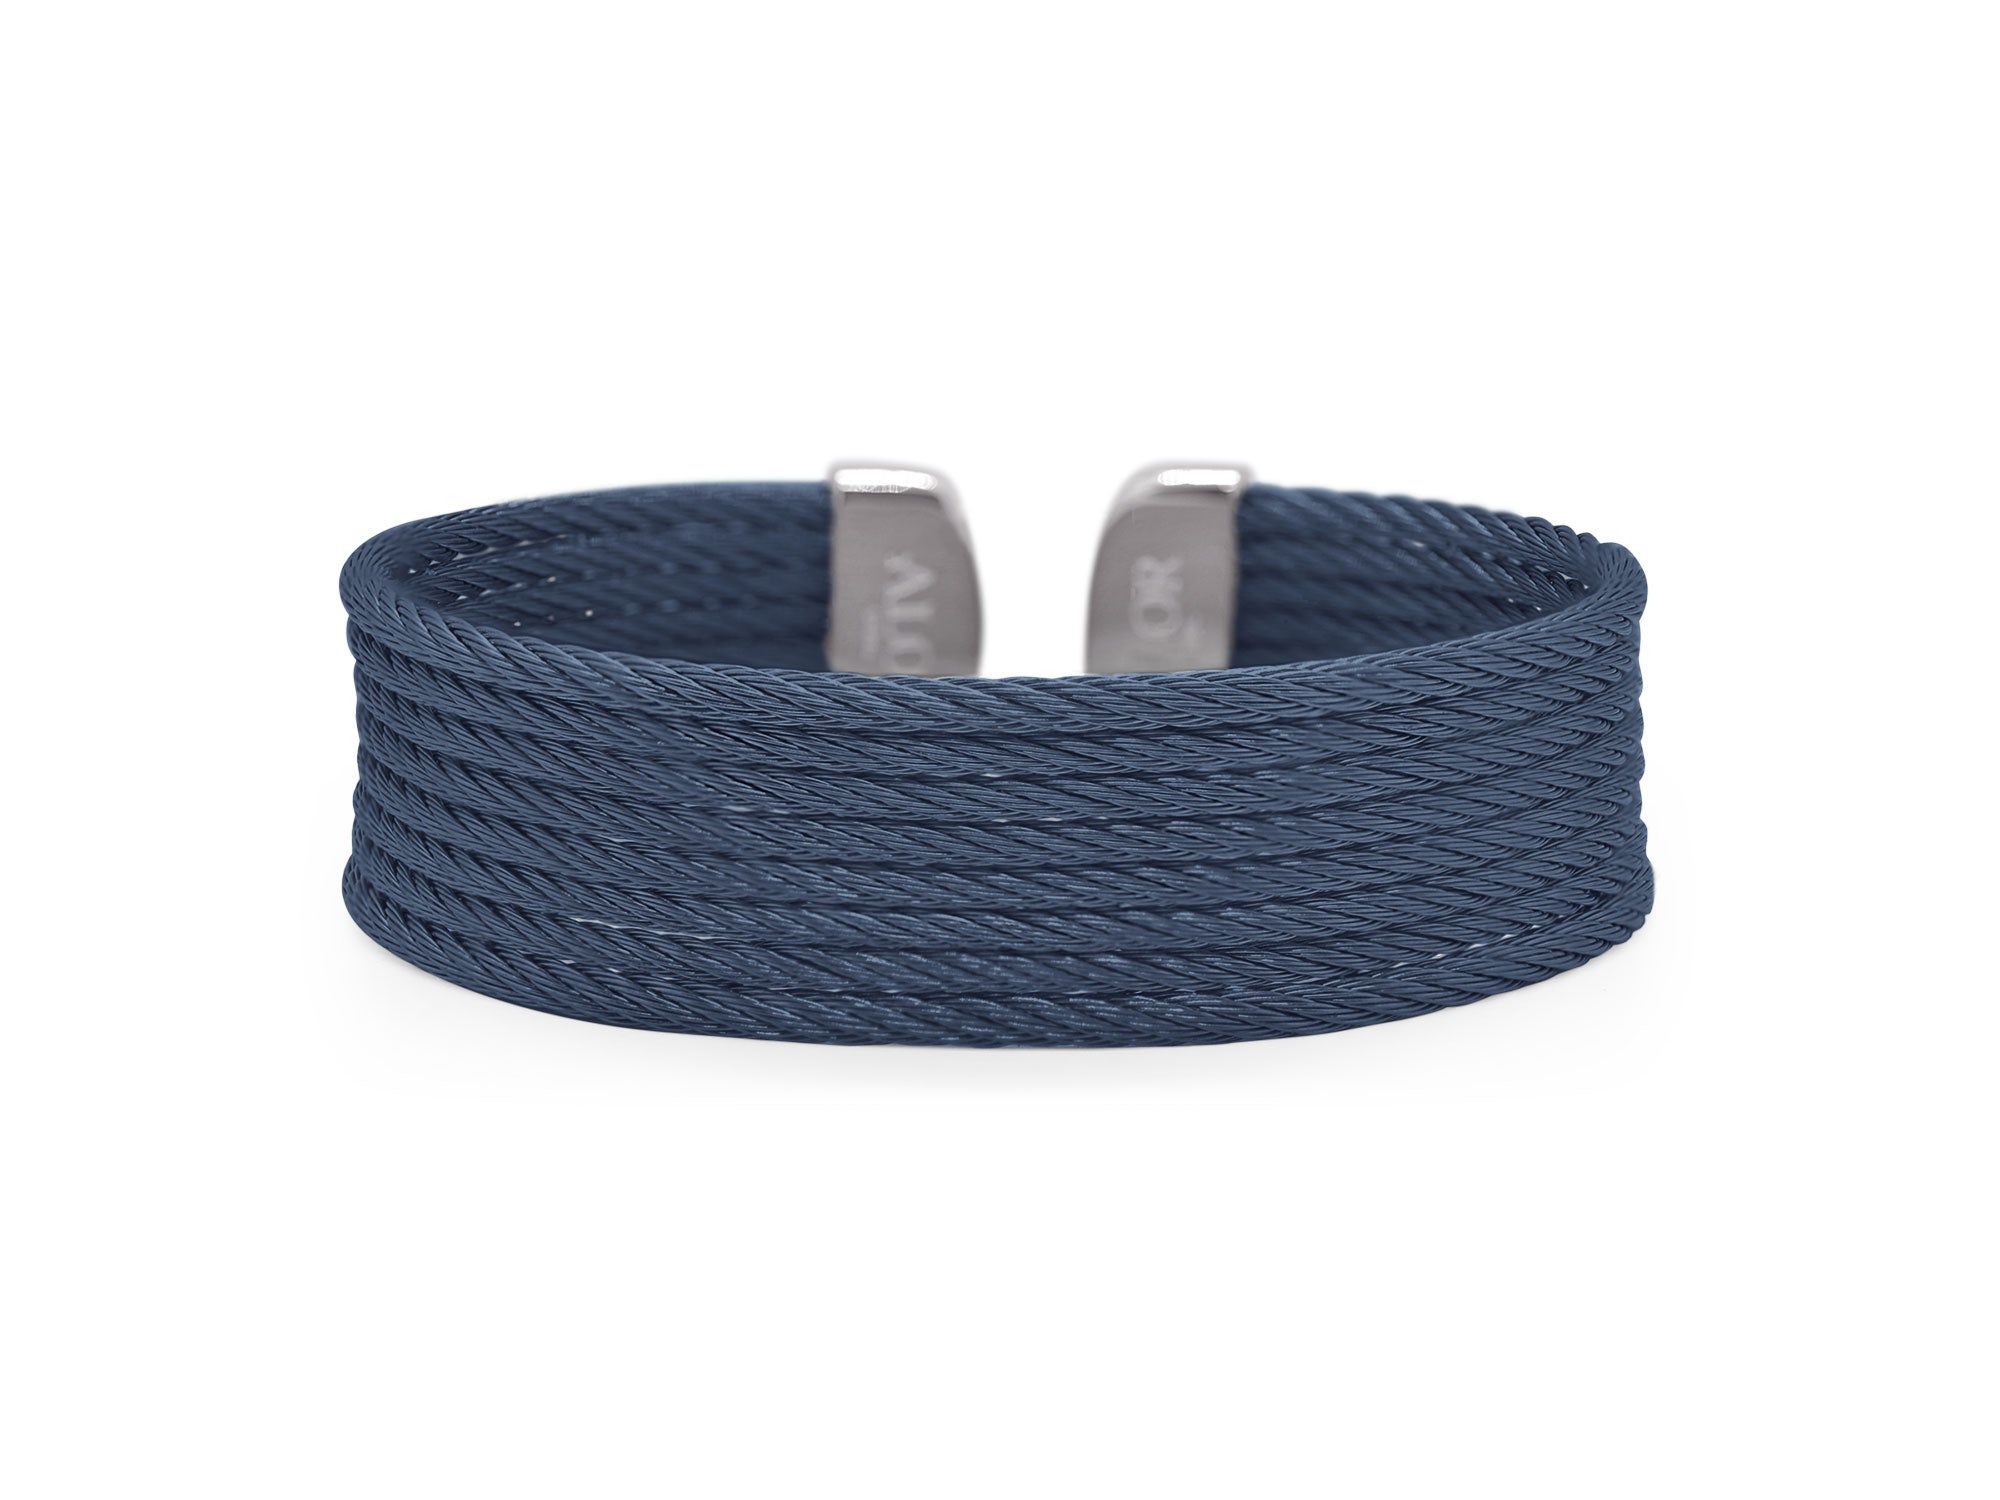 Blueberry Cable 8-Row Cuff